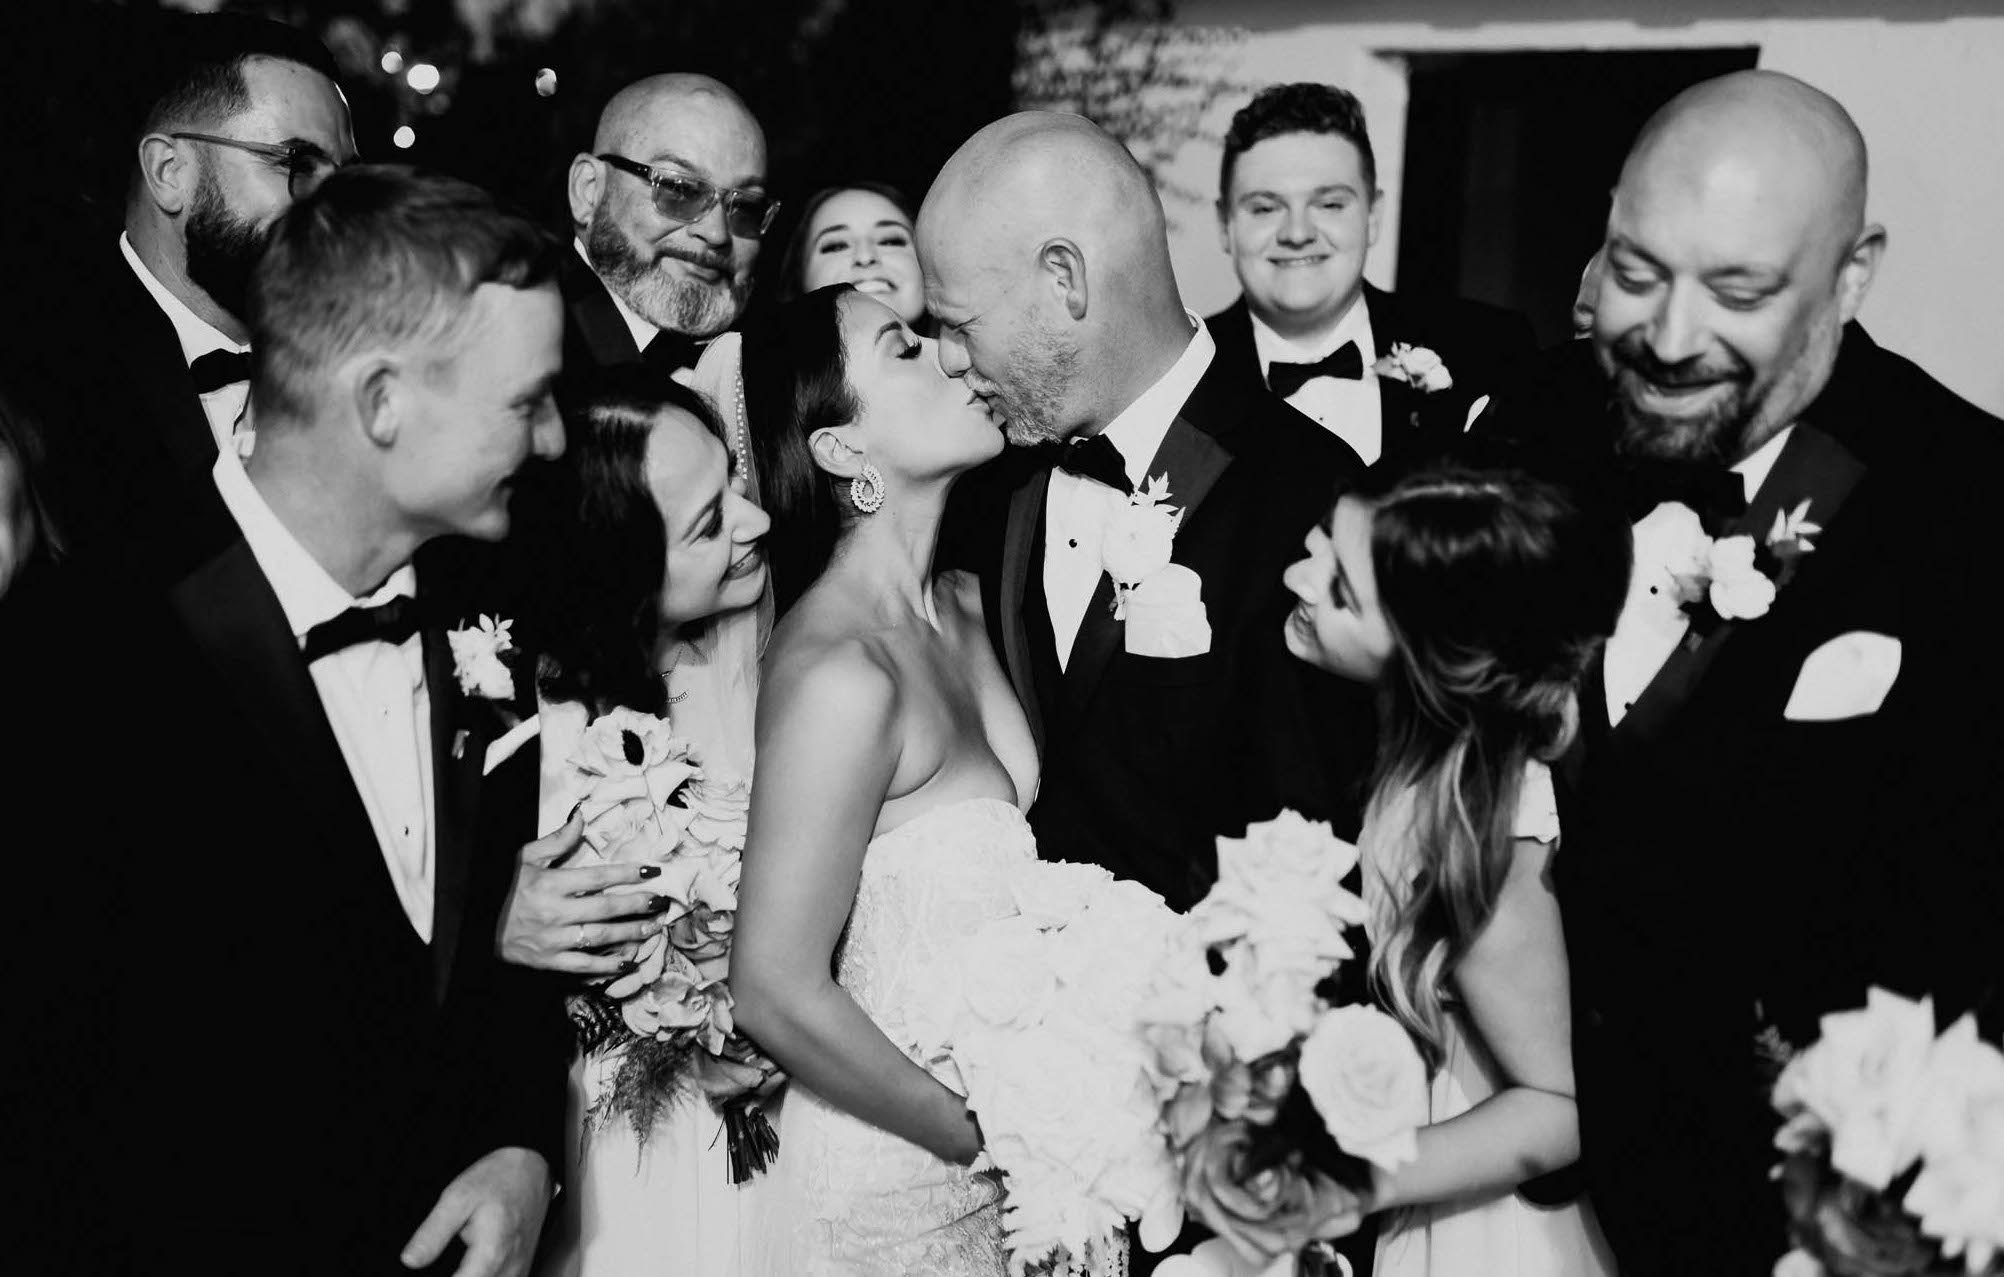 A black and white photo of a bride and groom kissing while their wedding guests circle around them.